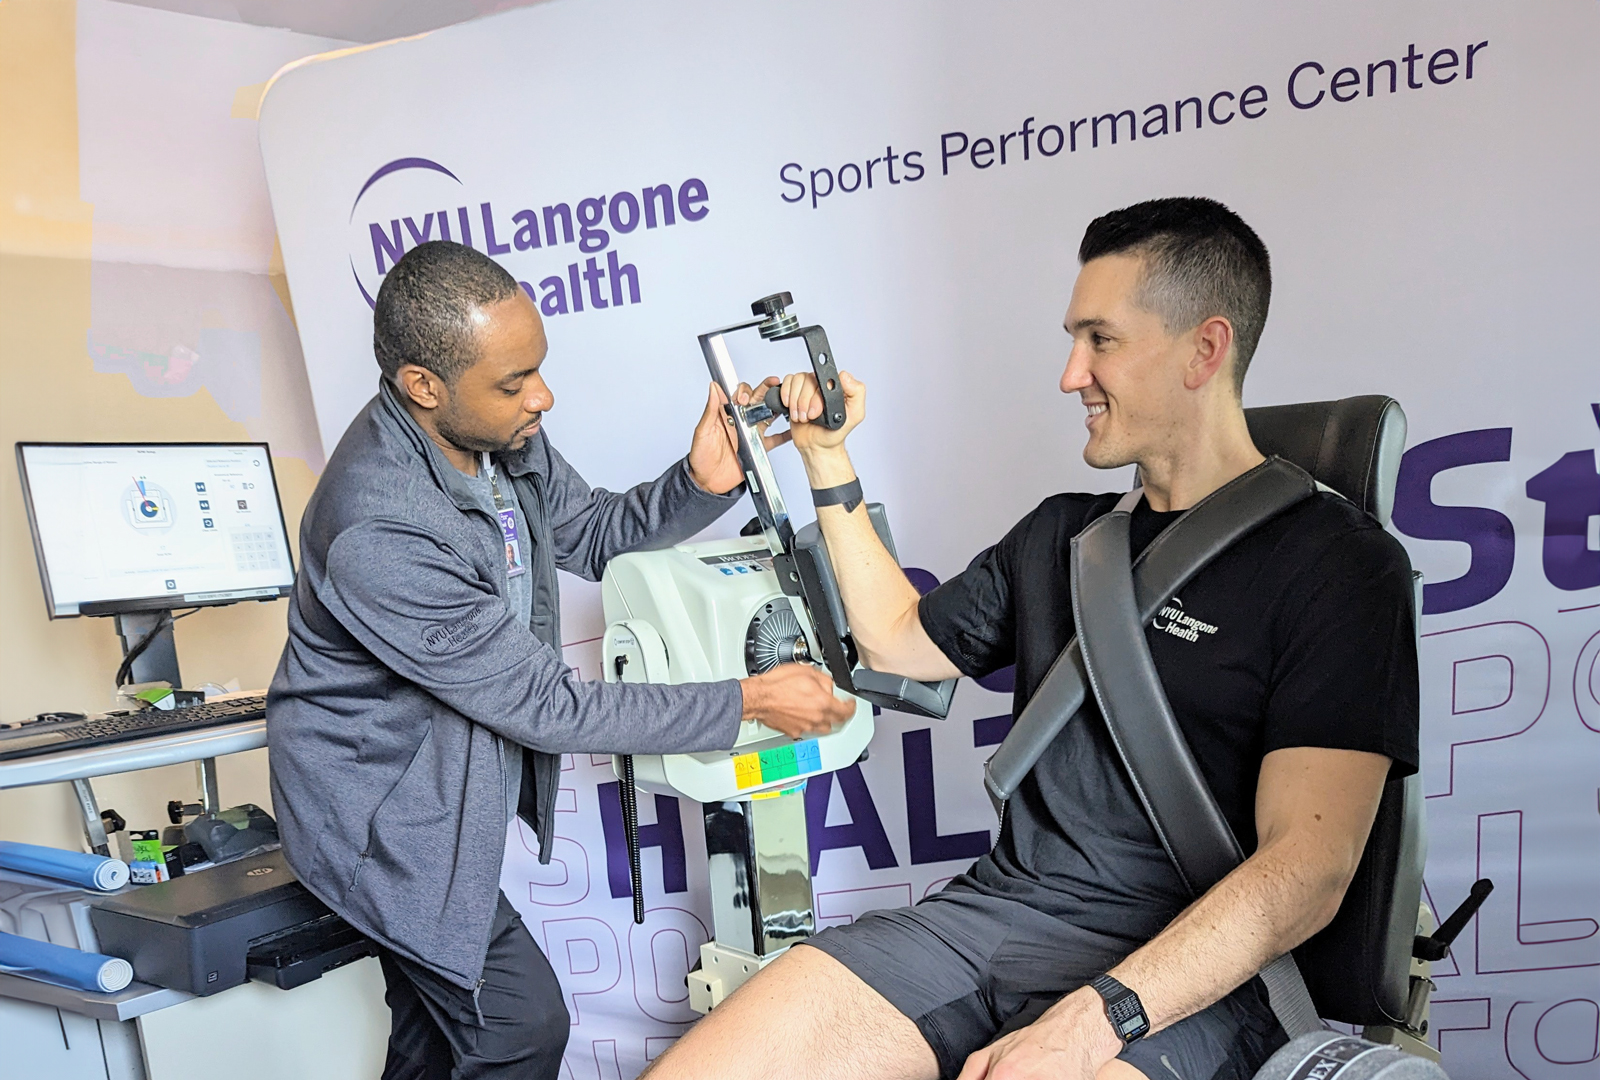 A specialist tests a patient’s arm at the Sports Performance Center.